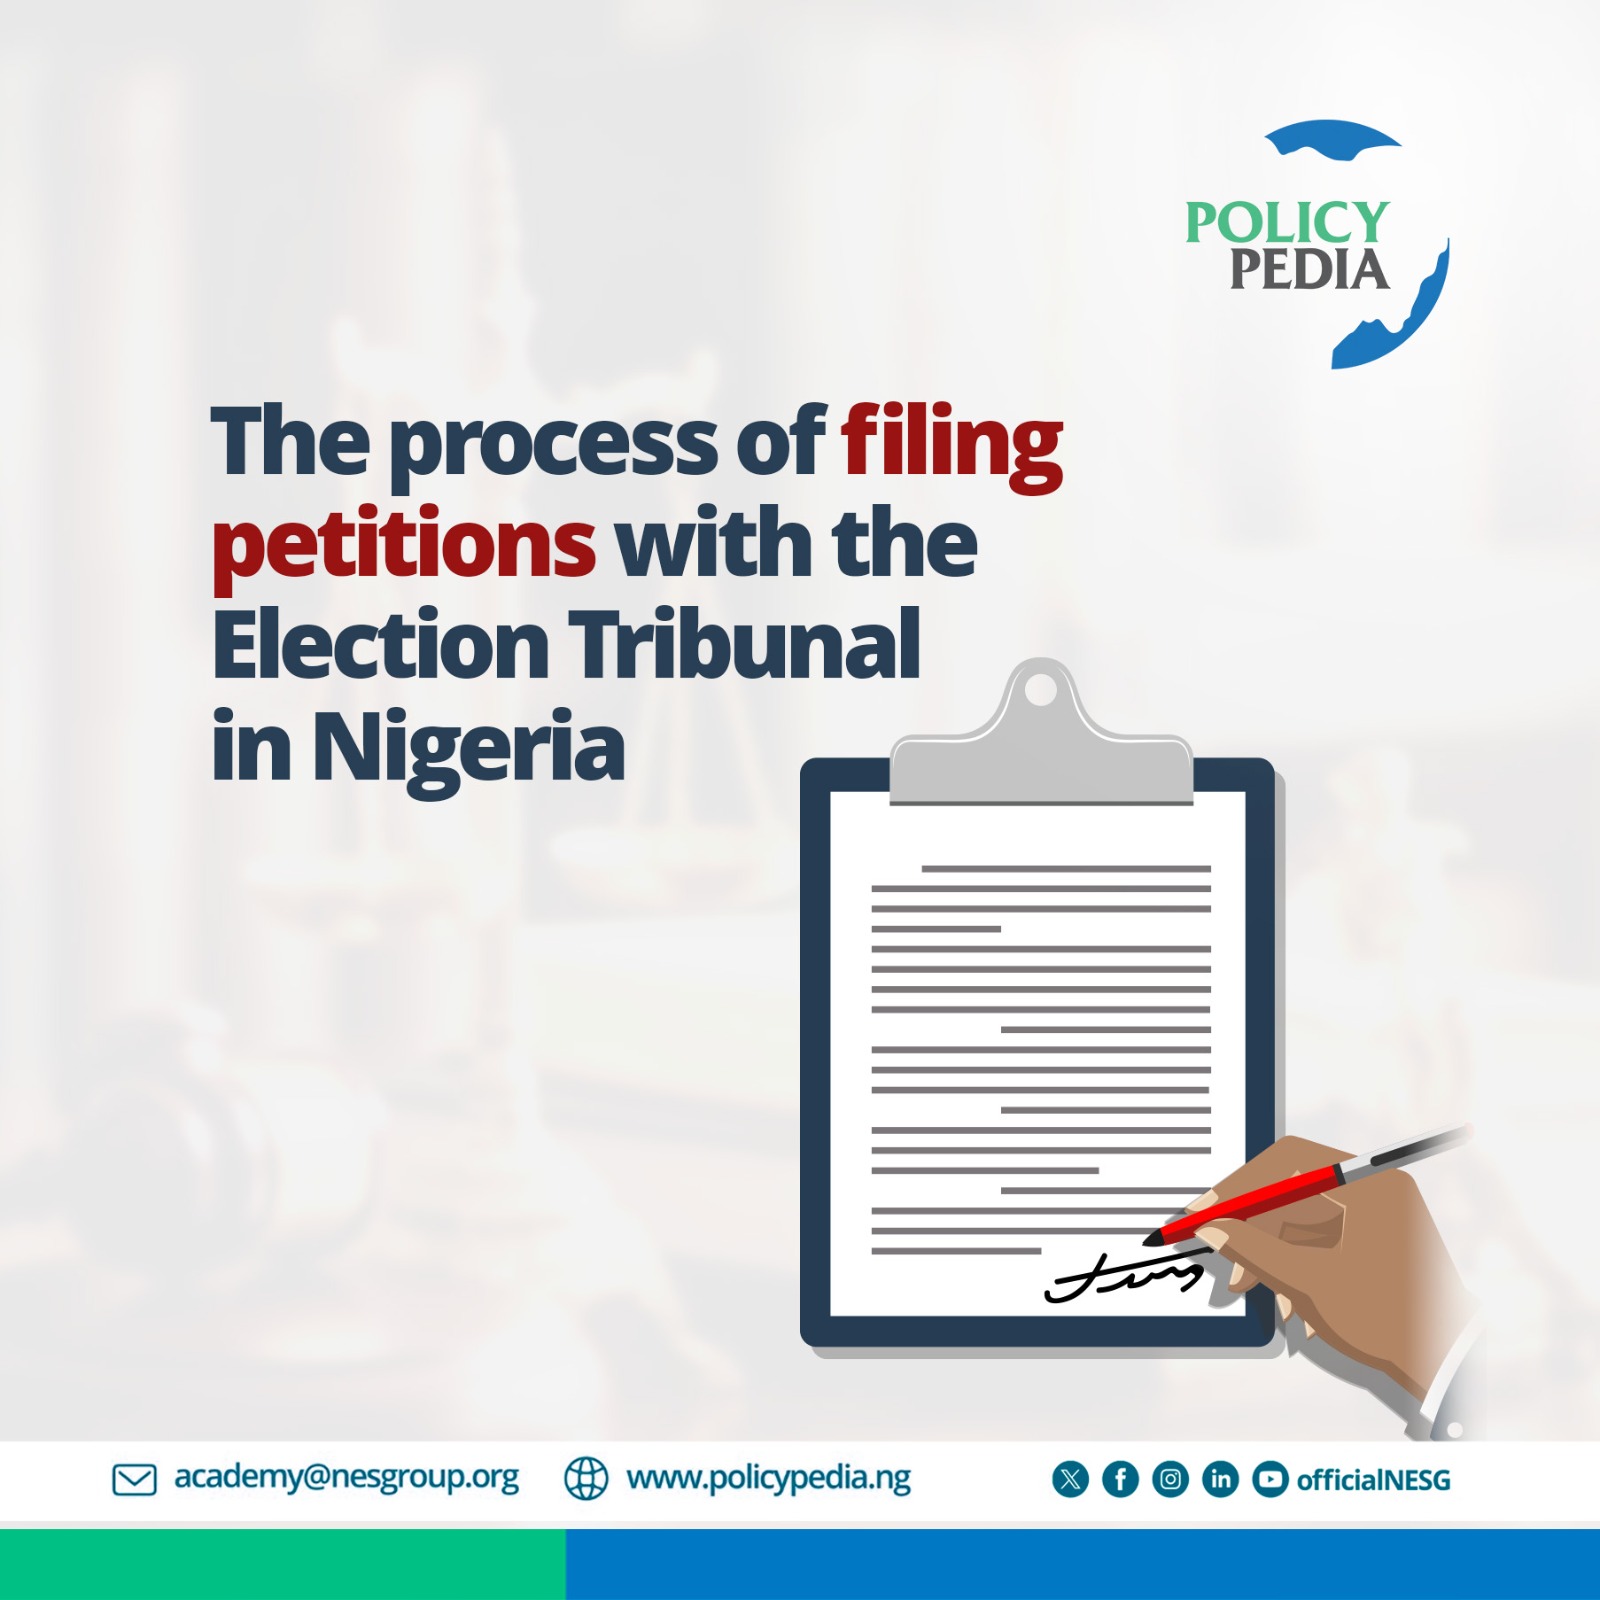 The Process of Filing Petitions with the Election Tribunal in Nigeria